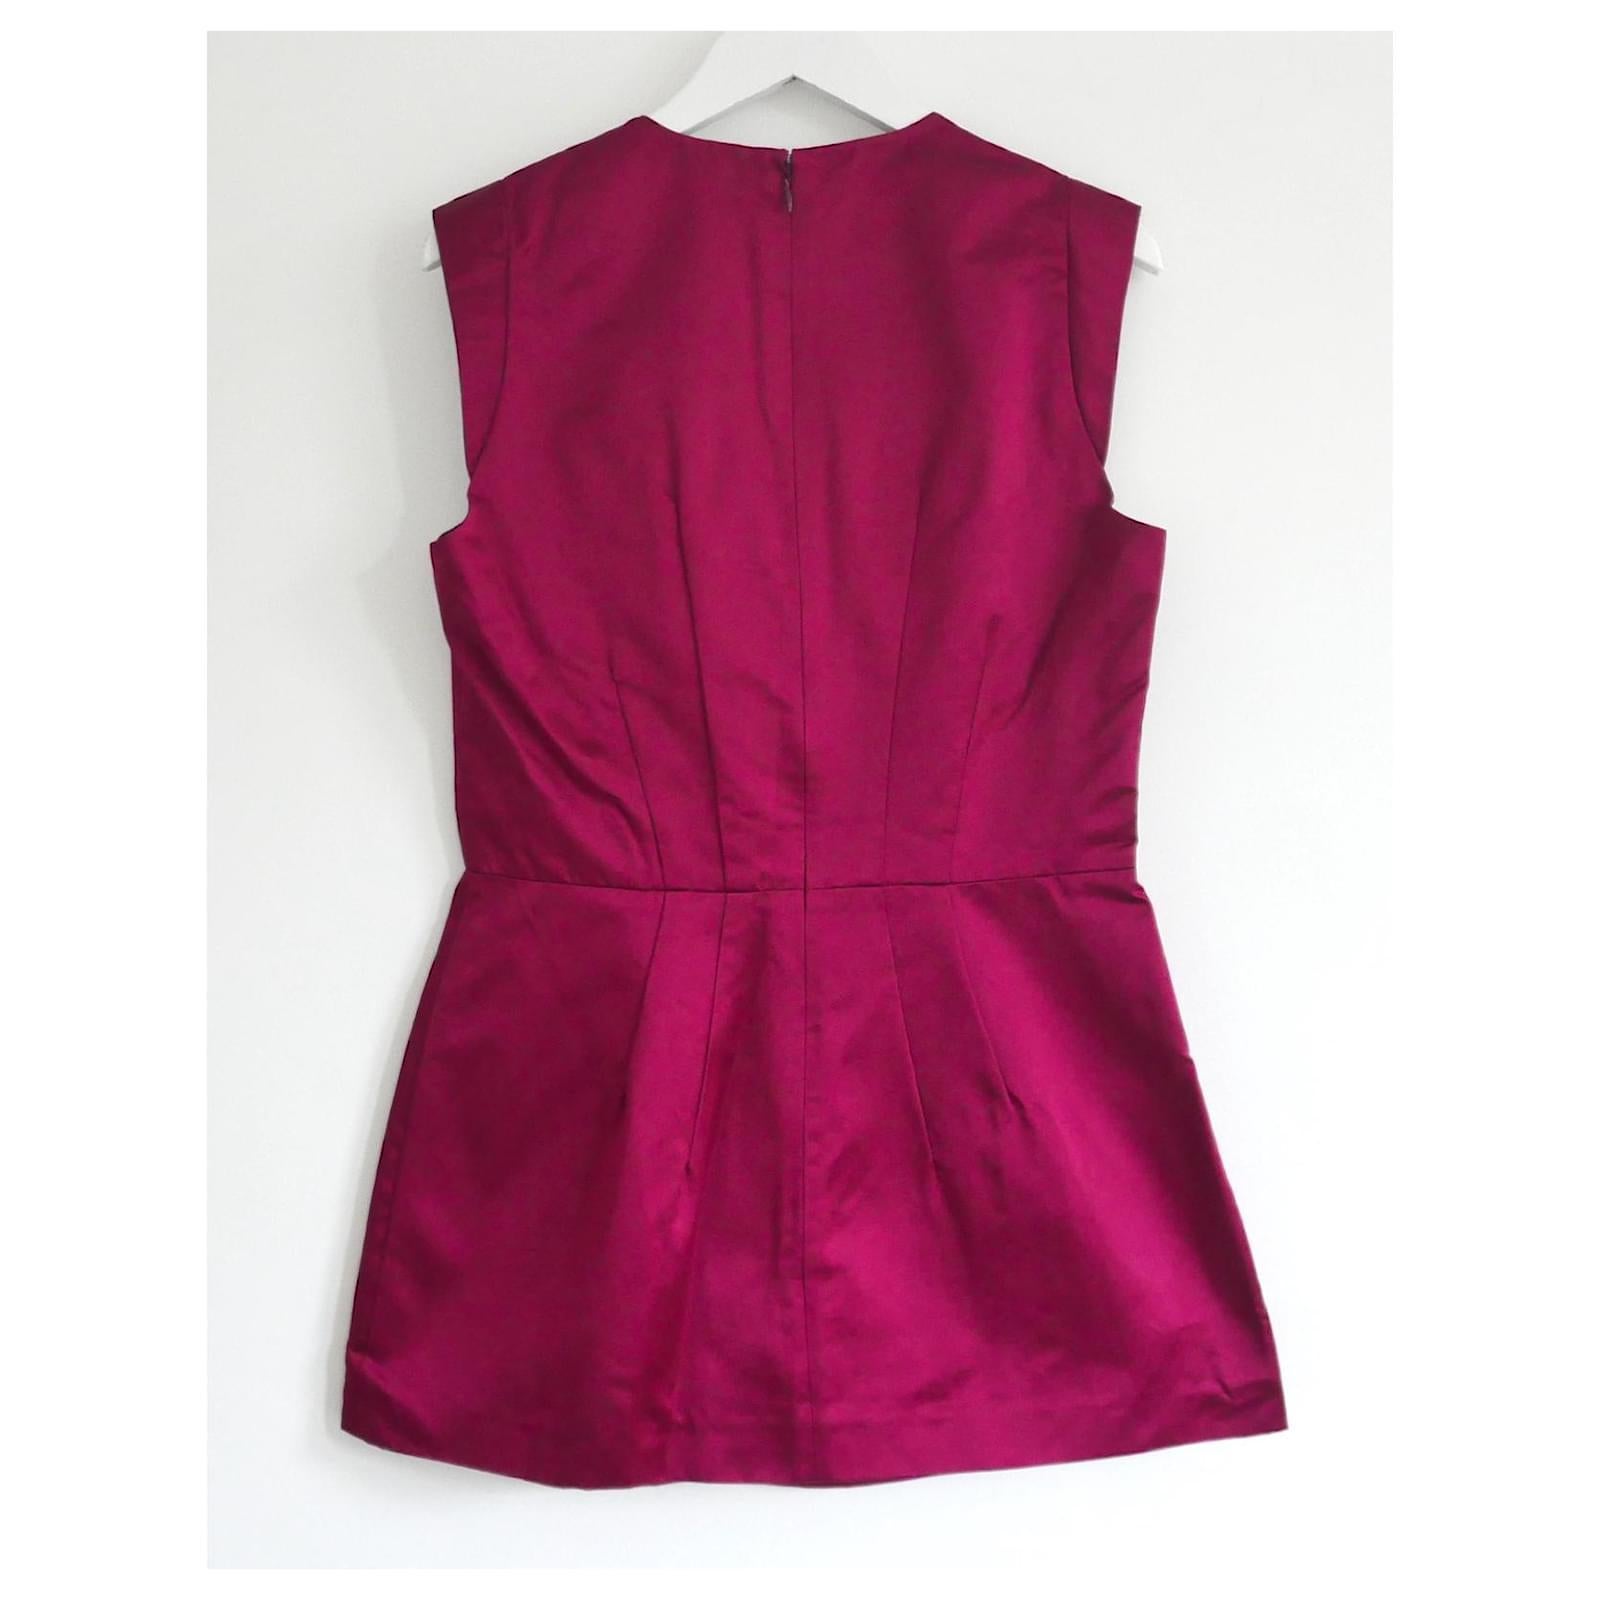 Prada Spring 2006 Silk Satin Tailored Peplum Top In Excellent Condition For Sale In London, GB